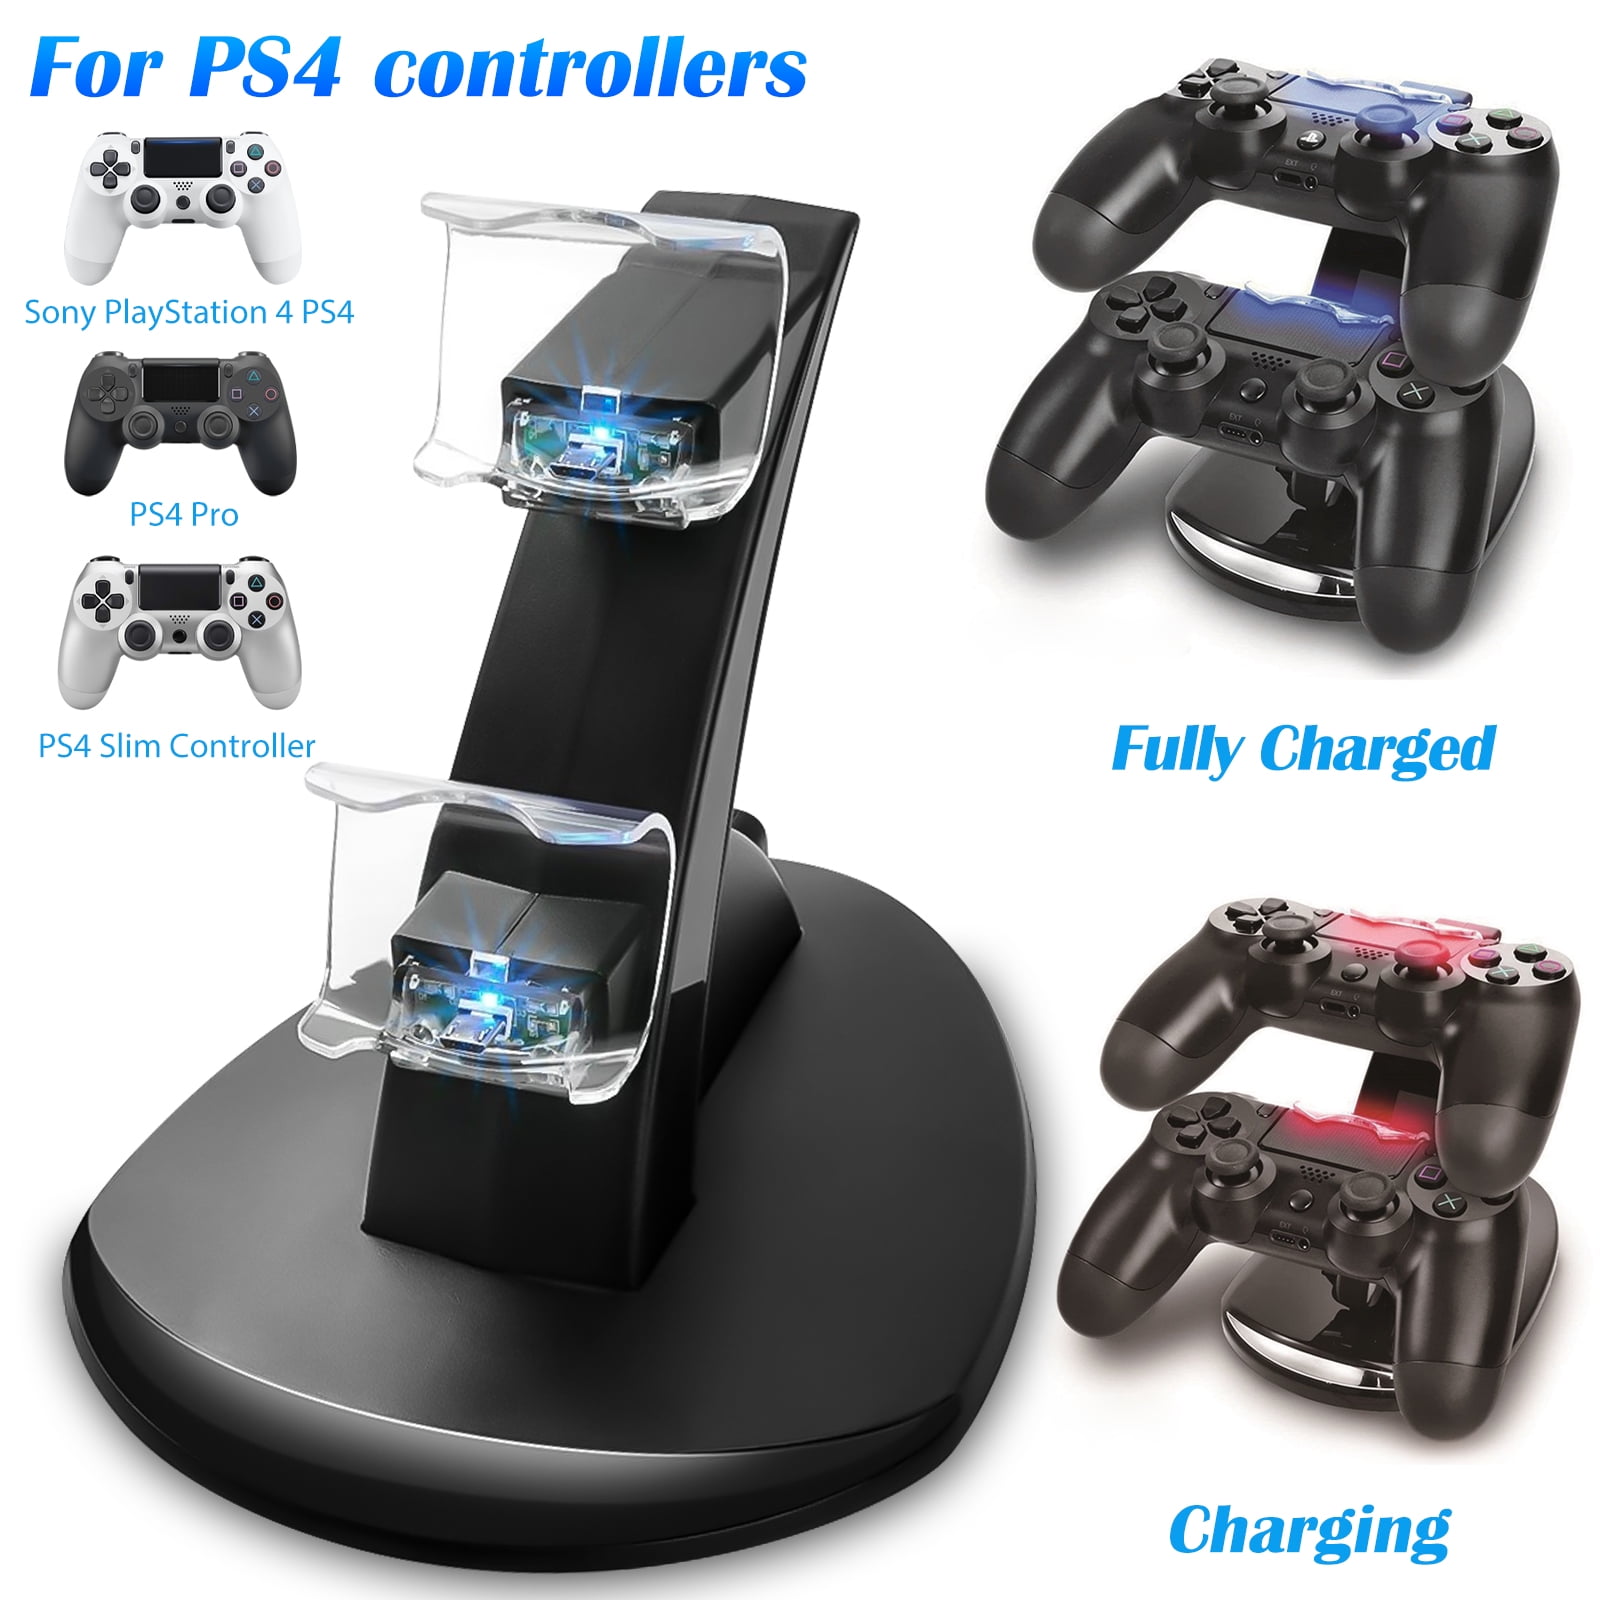 Playstation REYTID PS4 Slim Vertical Dual Cooling Pad Plus 2 x USB Charging Ports Charge Station Cooler USB Wireless Controller Black